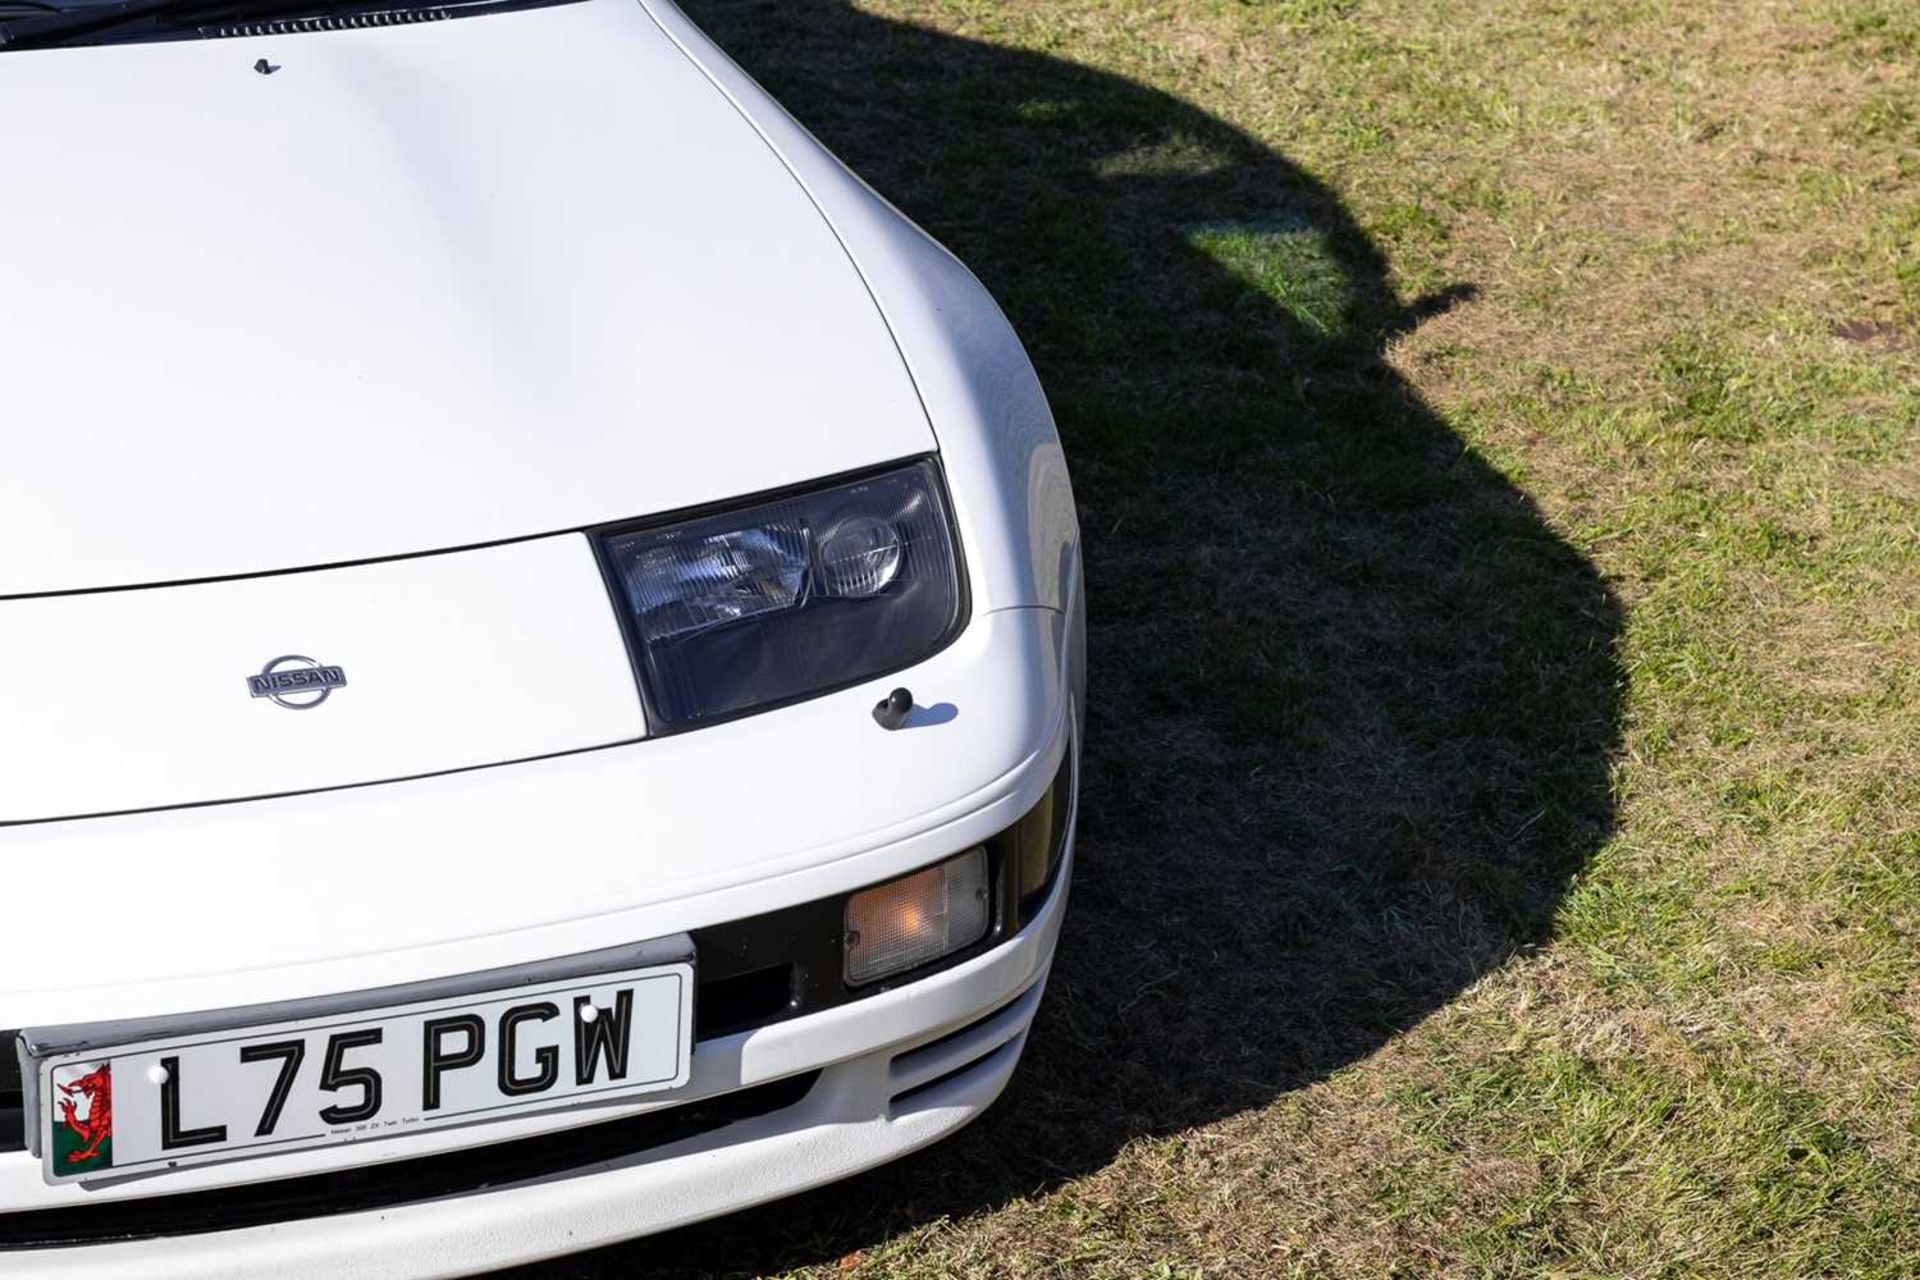 1990 Nissan 300ZX Turbo 2+2 Targa One of the last examples registered in the UK - Image 24 of 89